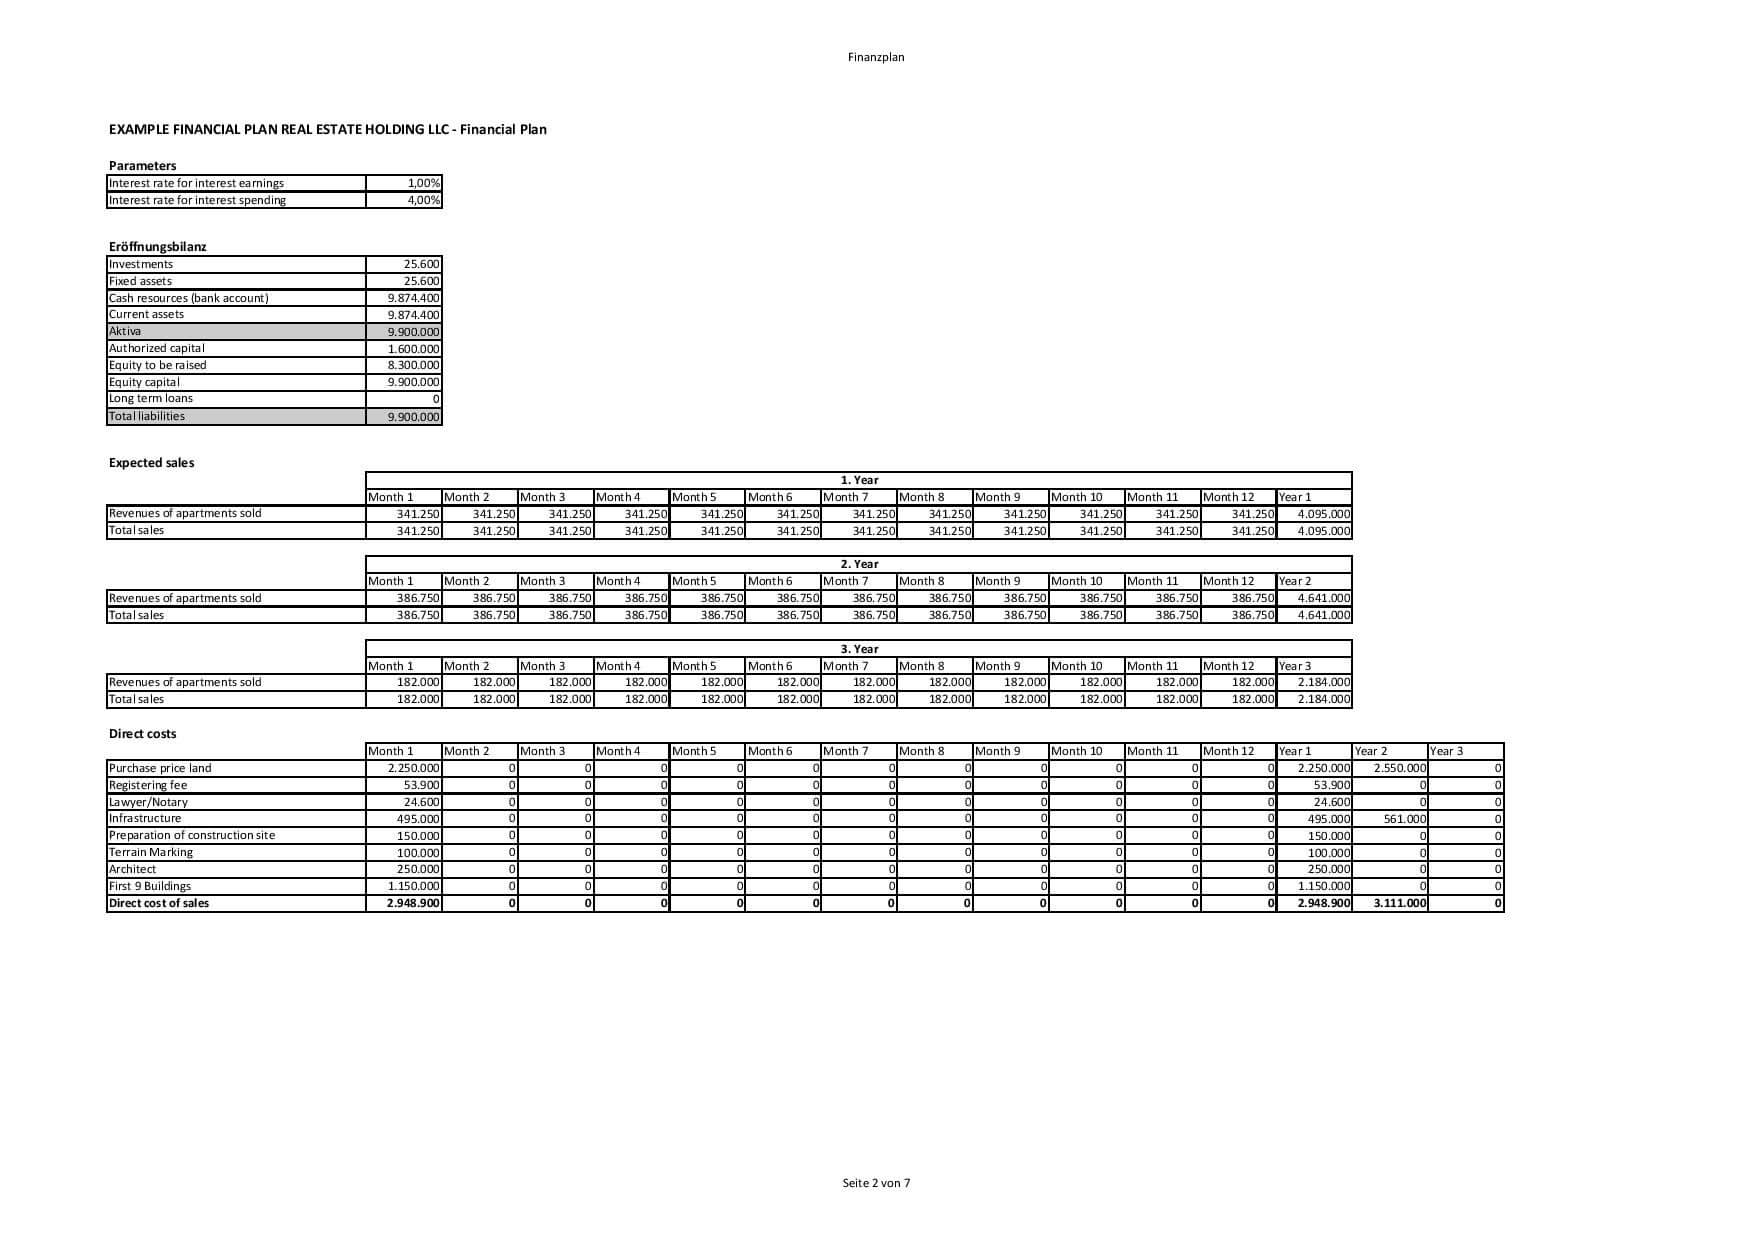 financial-plan_example-financial-plan-real-estate-holding-llc-1-page-002